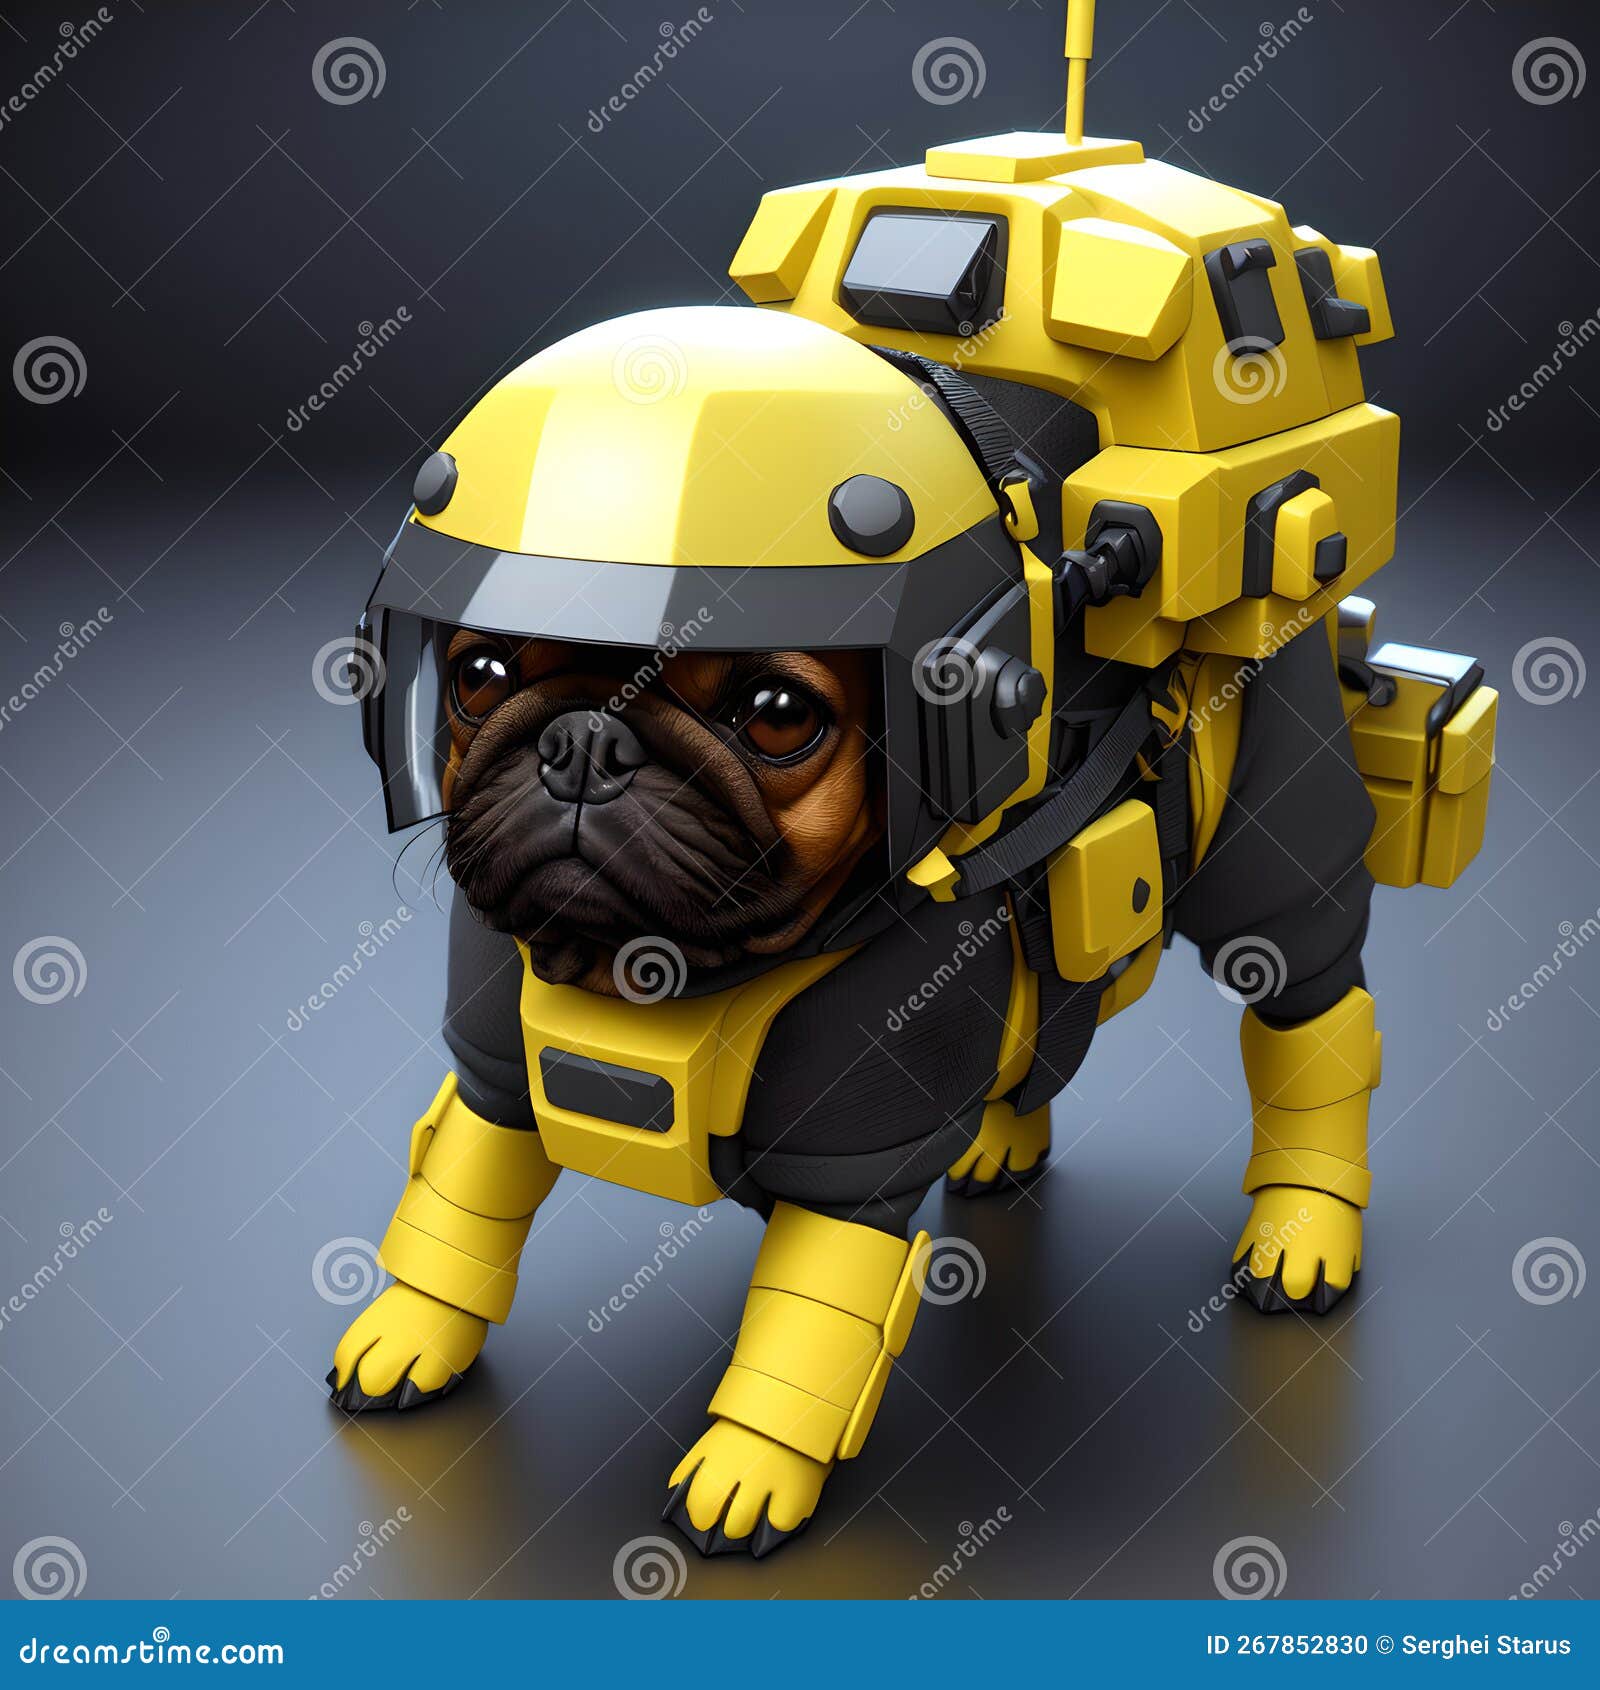 A Tiny Canine Equipped With Protective Gear, Depicted As A Sapper Or ...